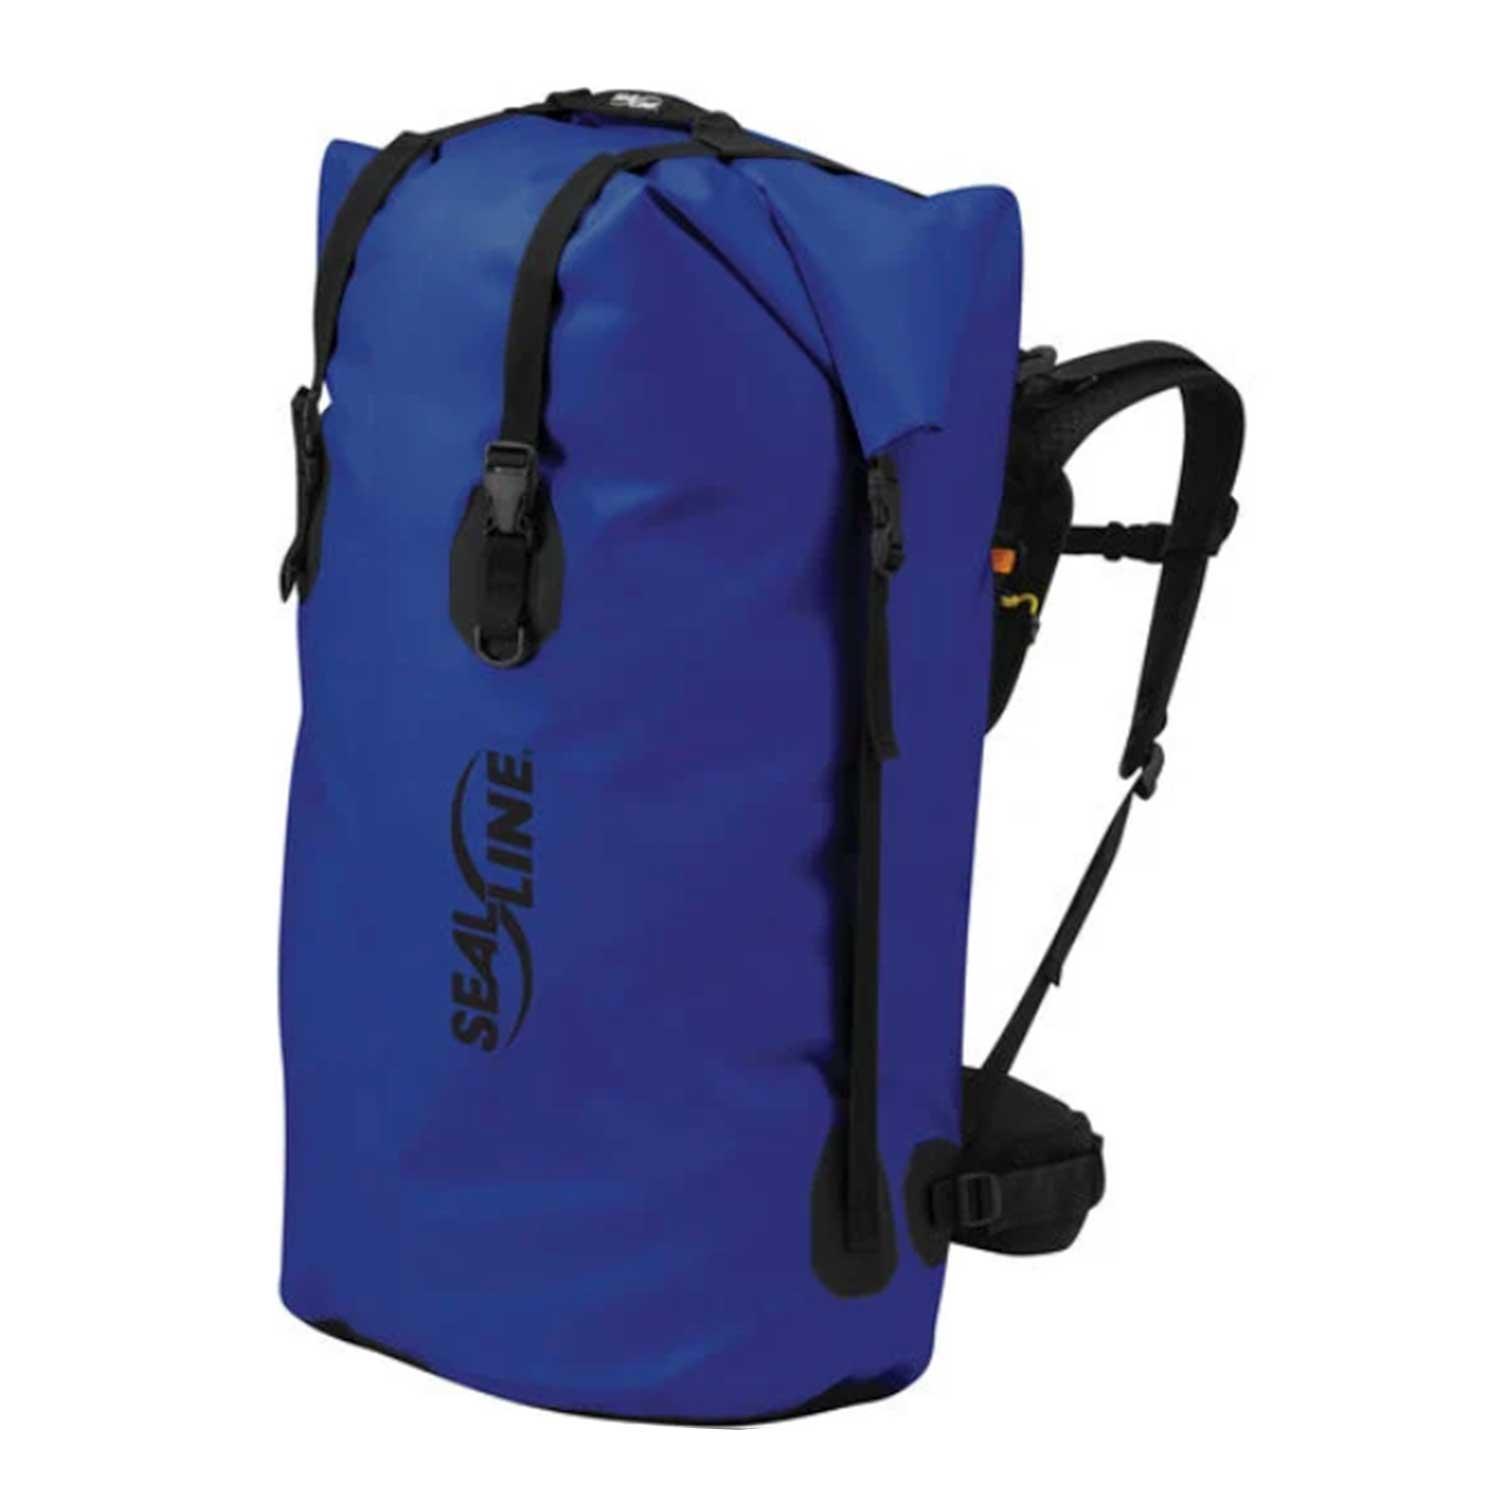 Black Canyon Dry Pack By Sealline | Boundary Waters Catalog